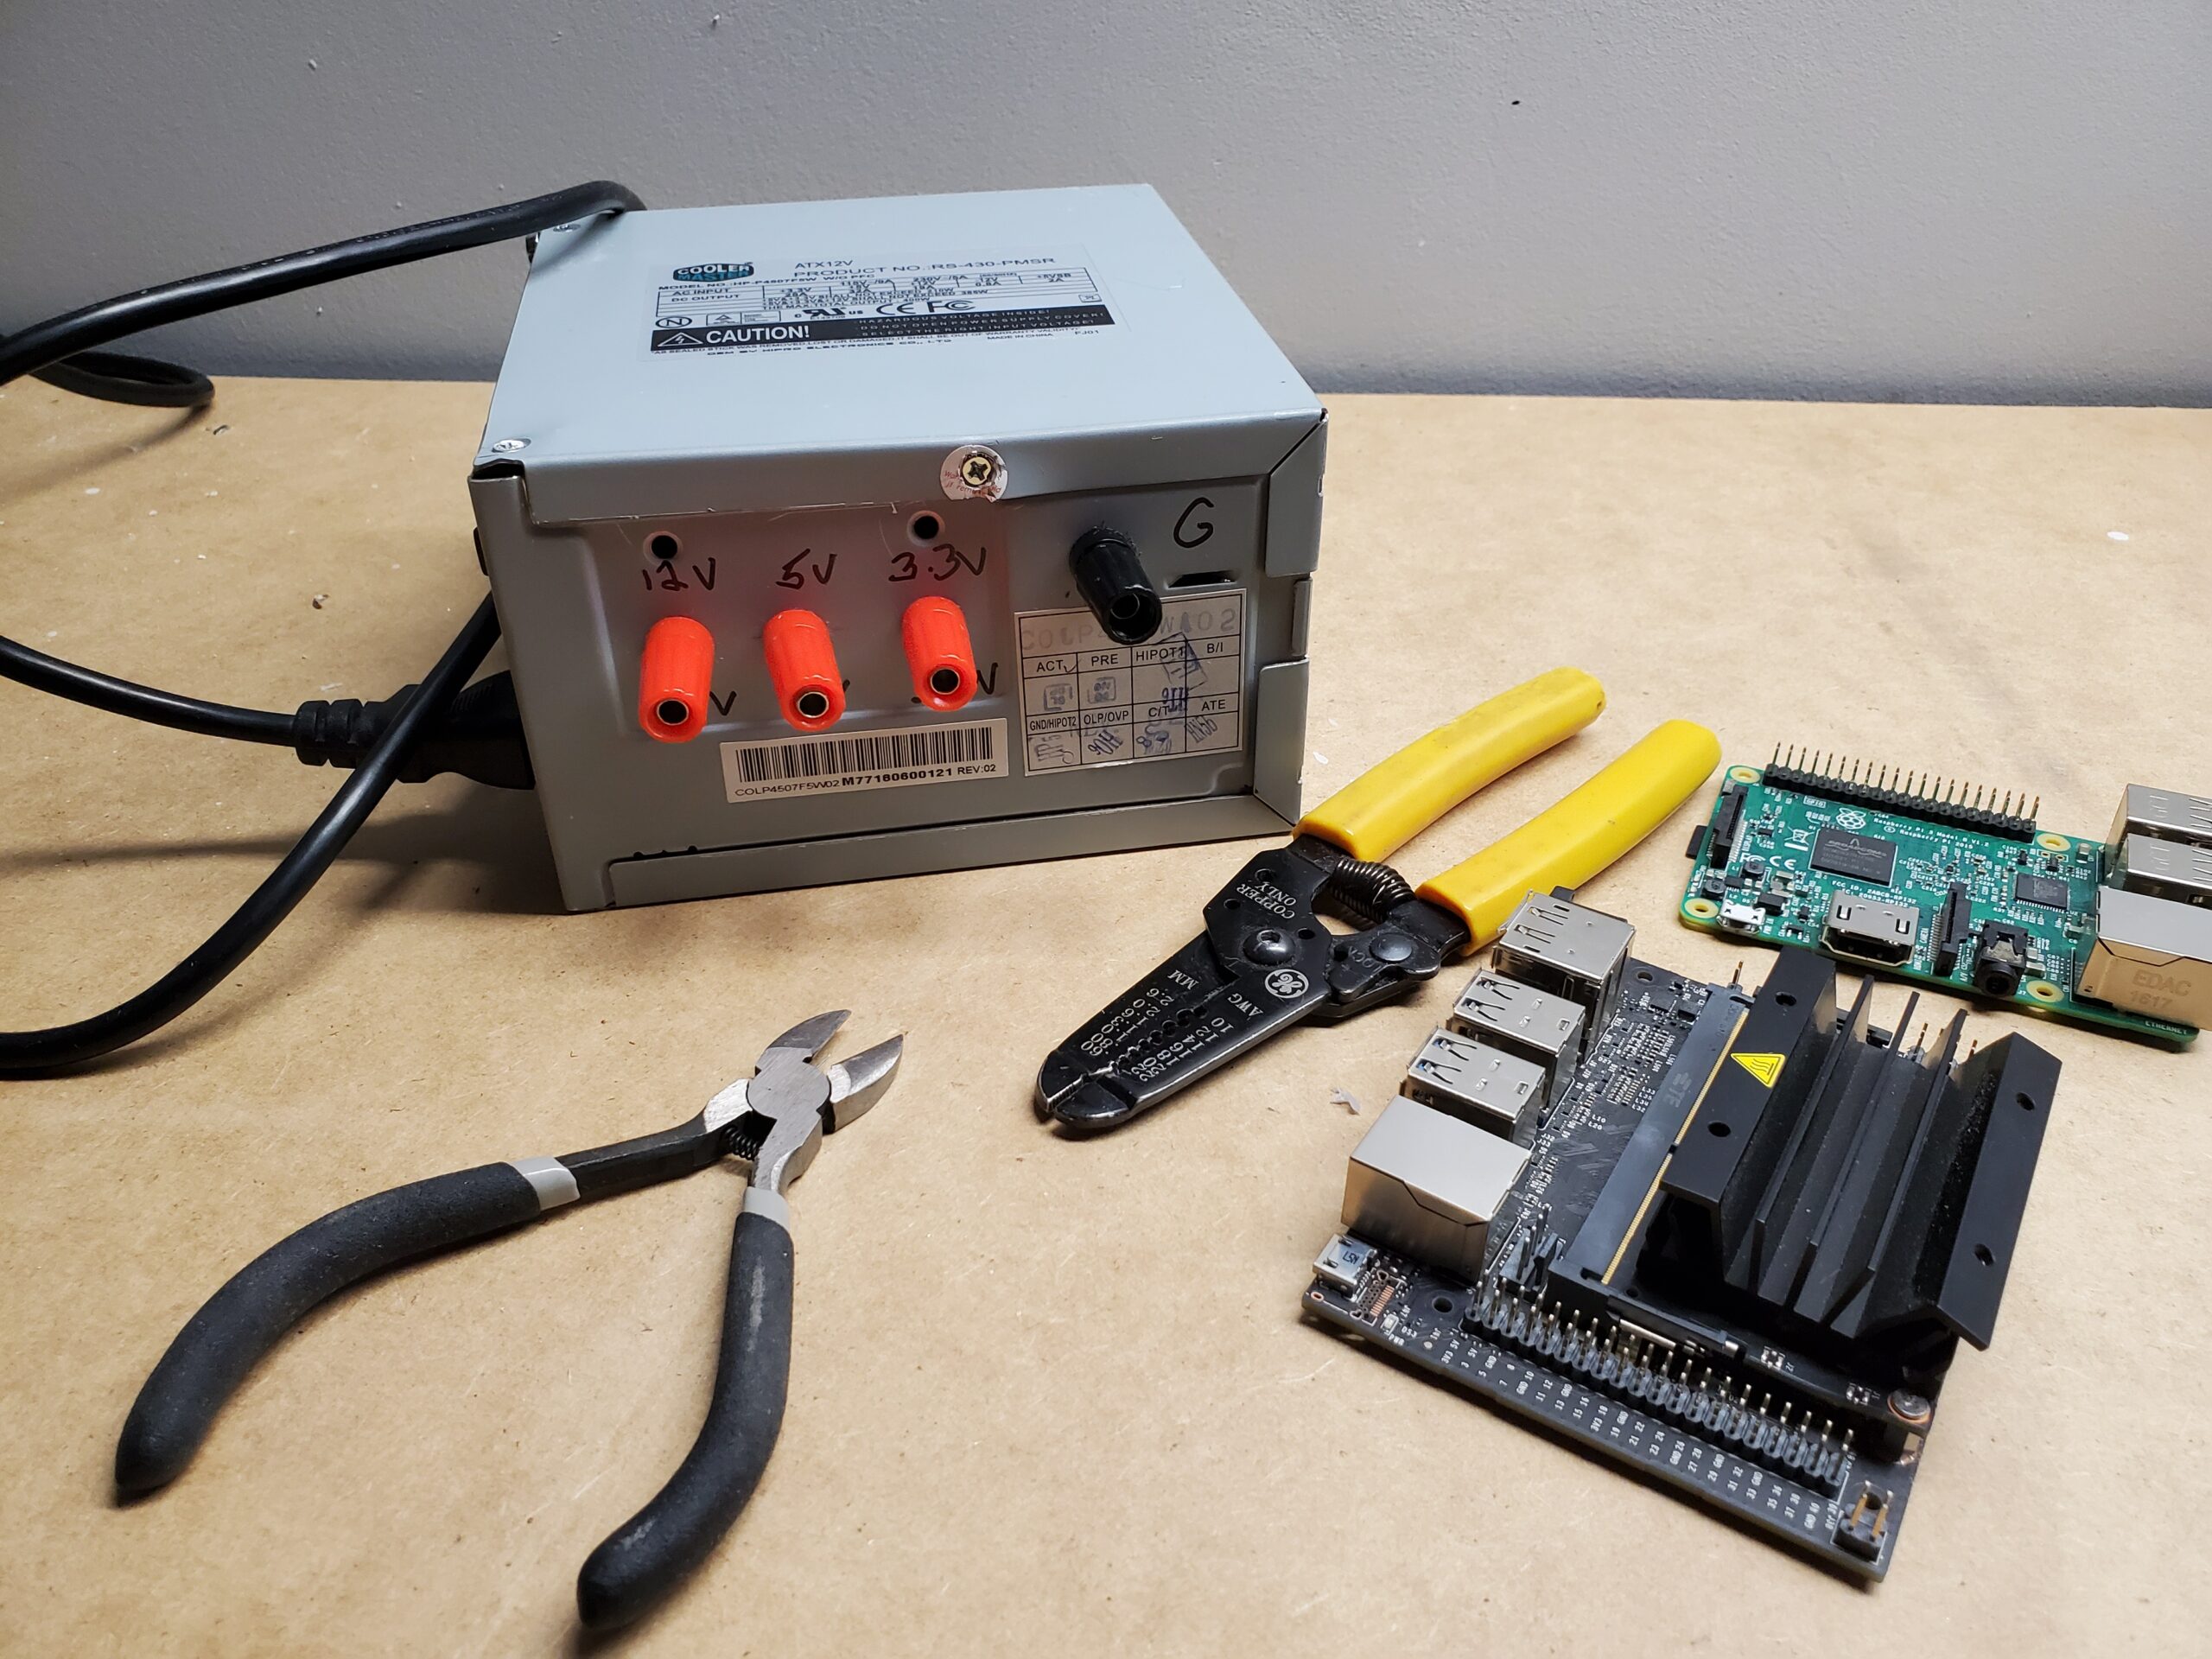 Desktop power supply unit converted to benchtop unit